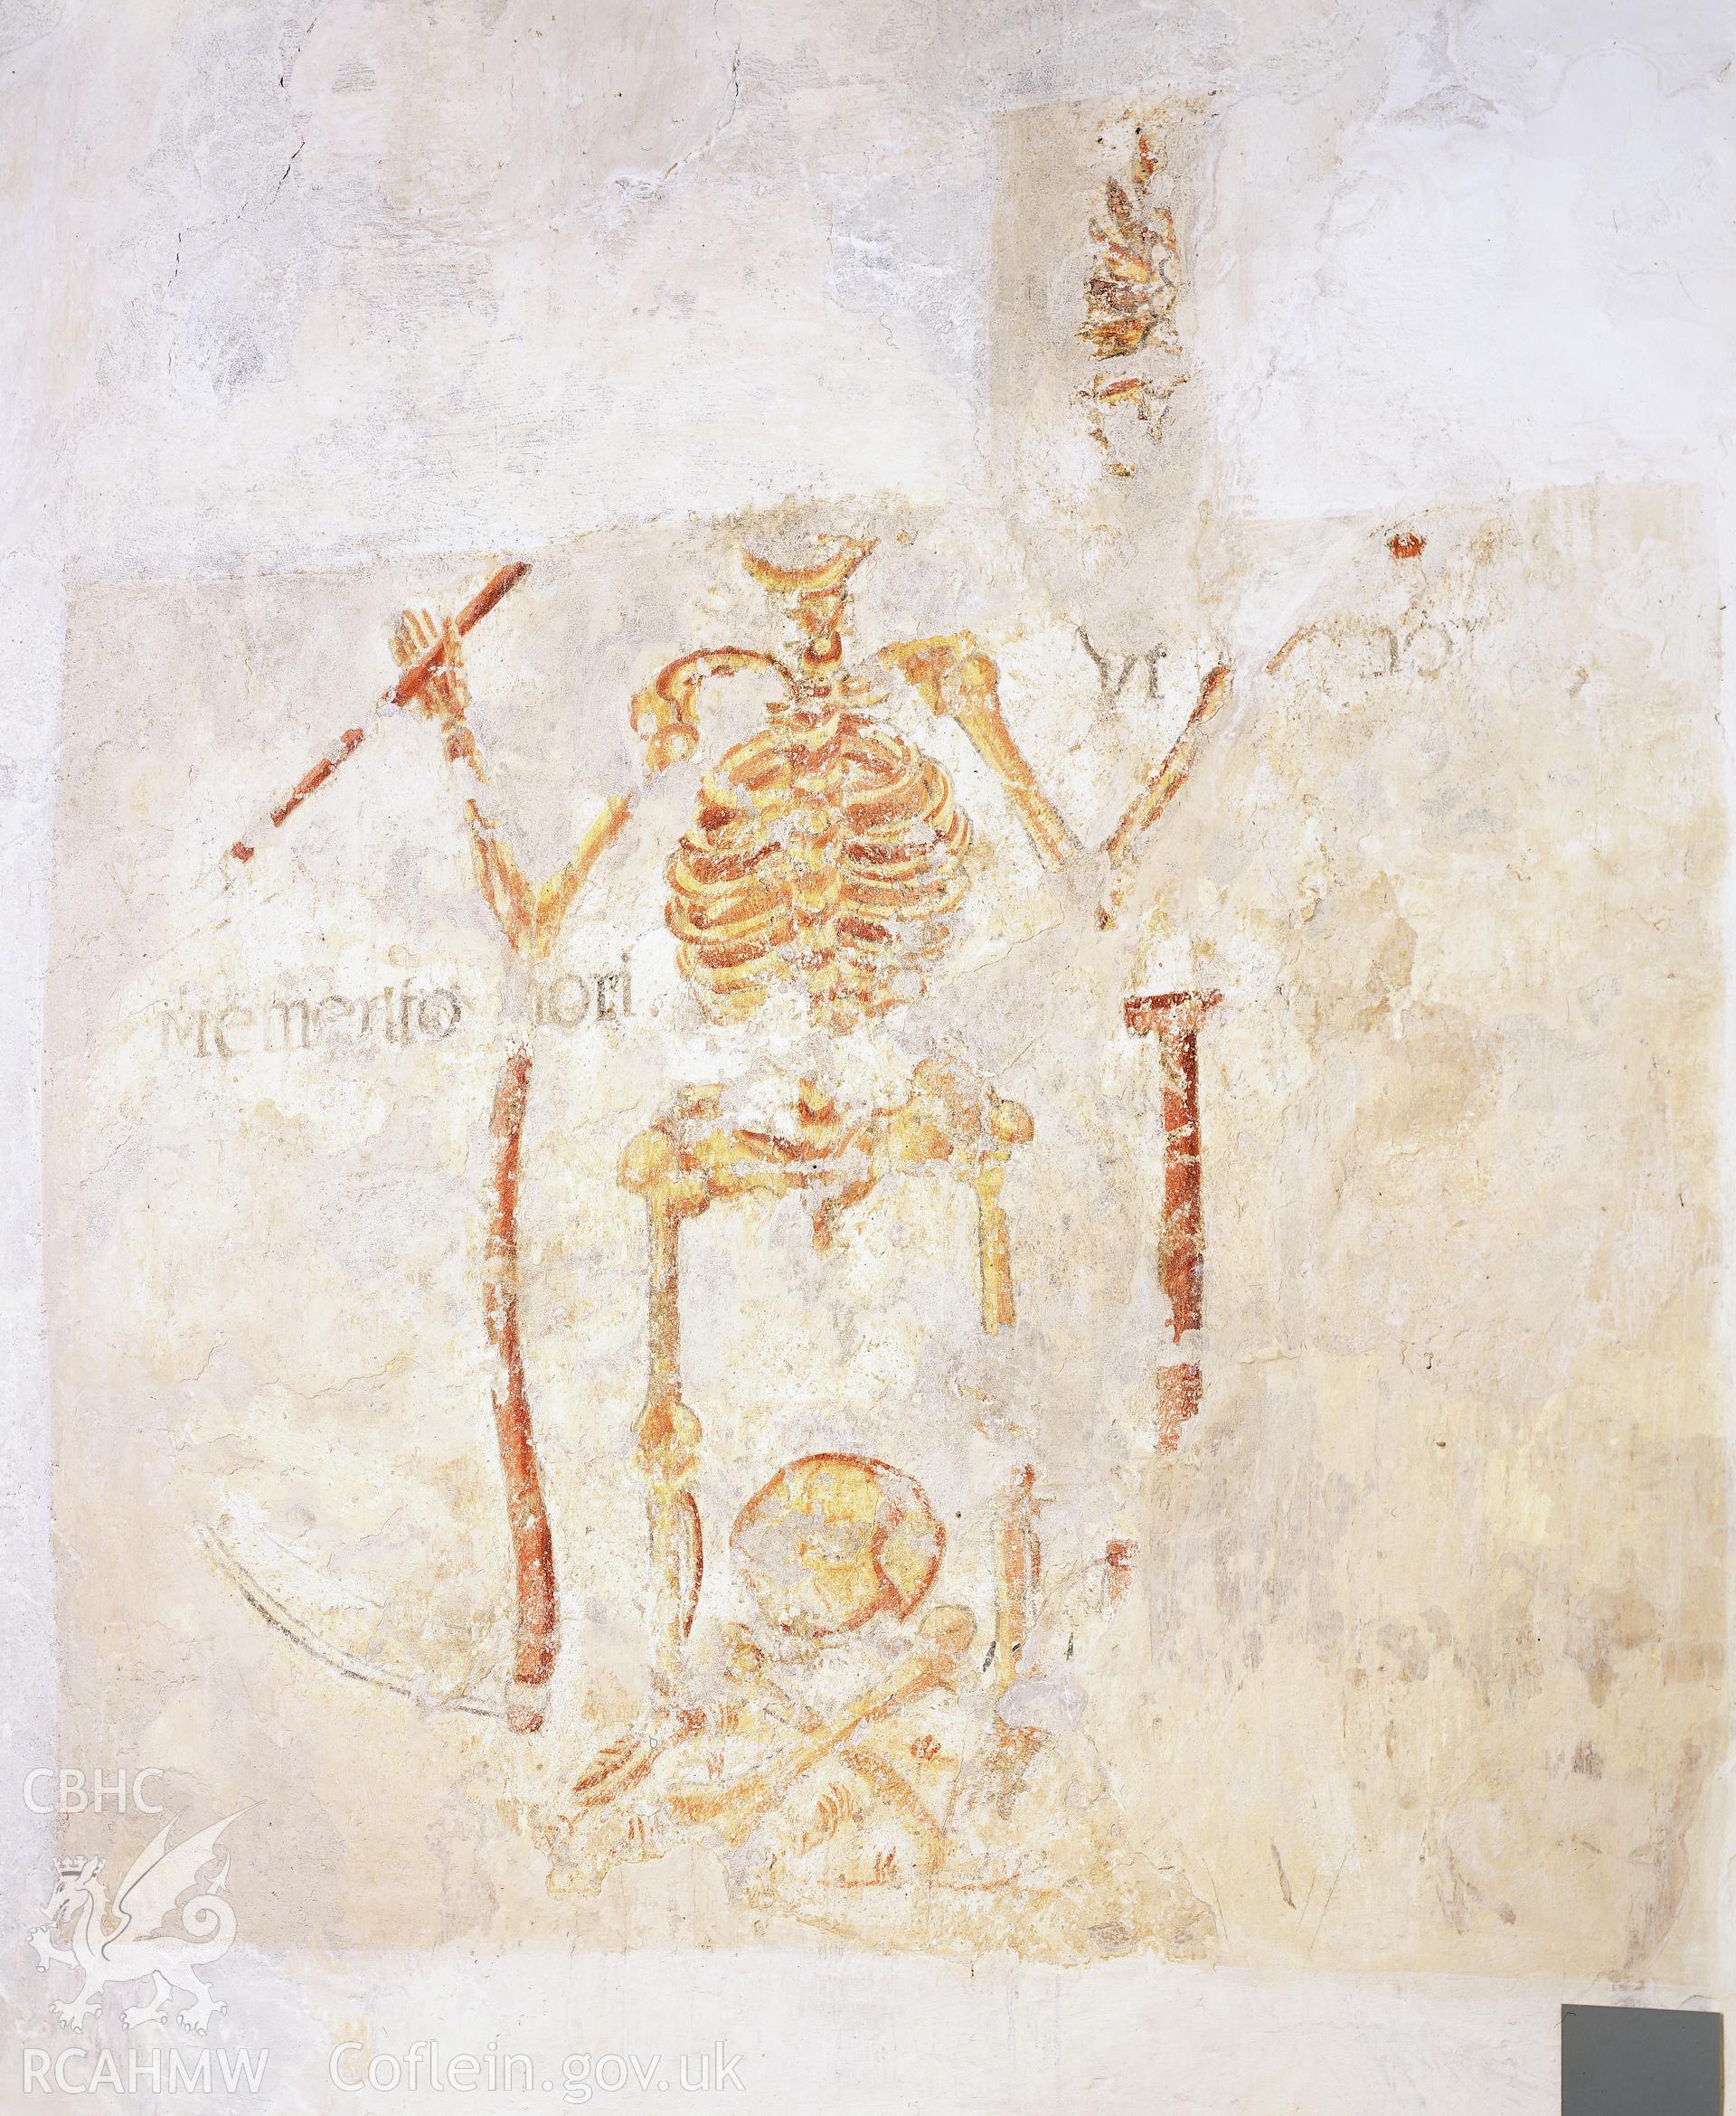 RCAHMW colour transparency showing  view of memento mori wallpainting at St Celynin's Church, Llangelynin.